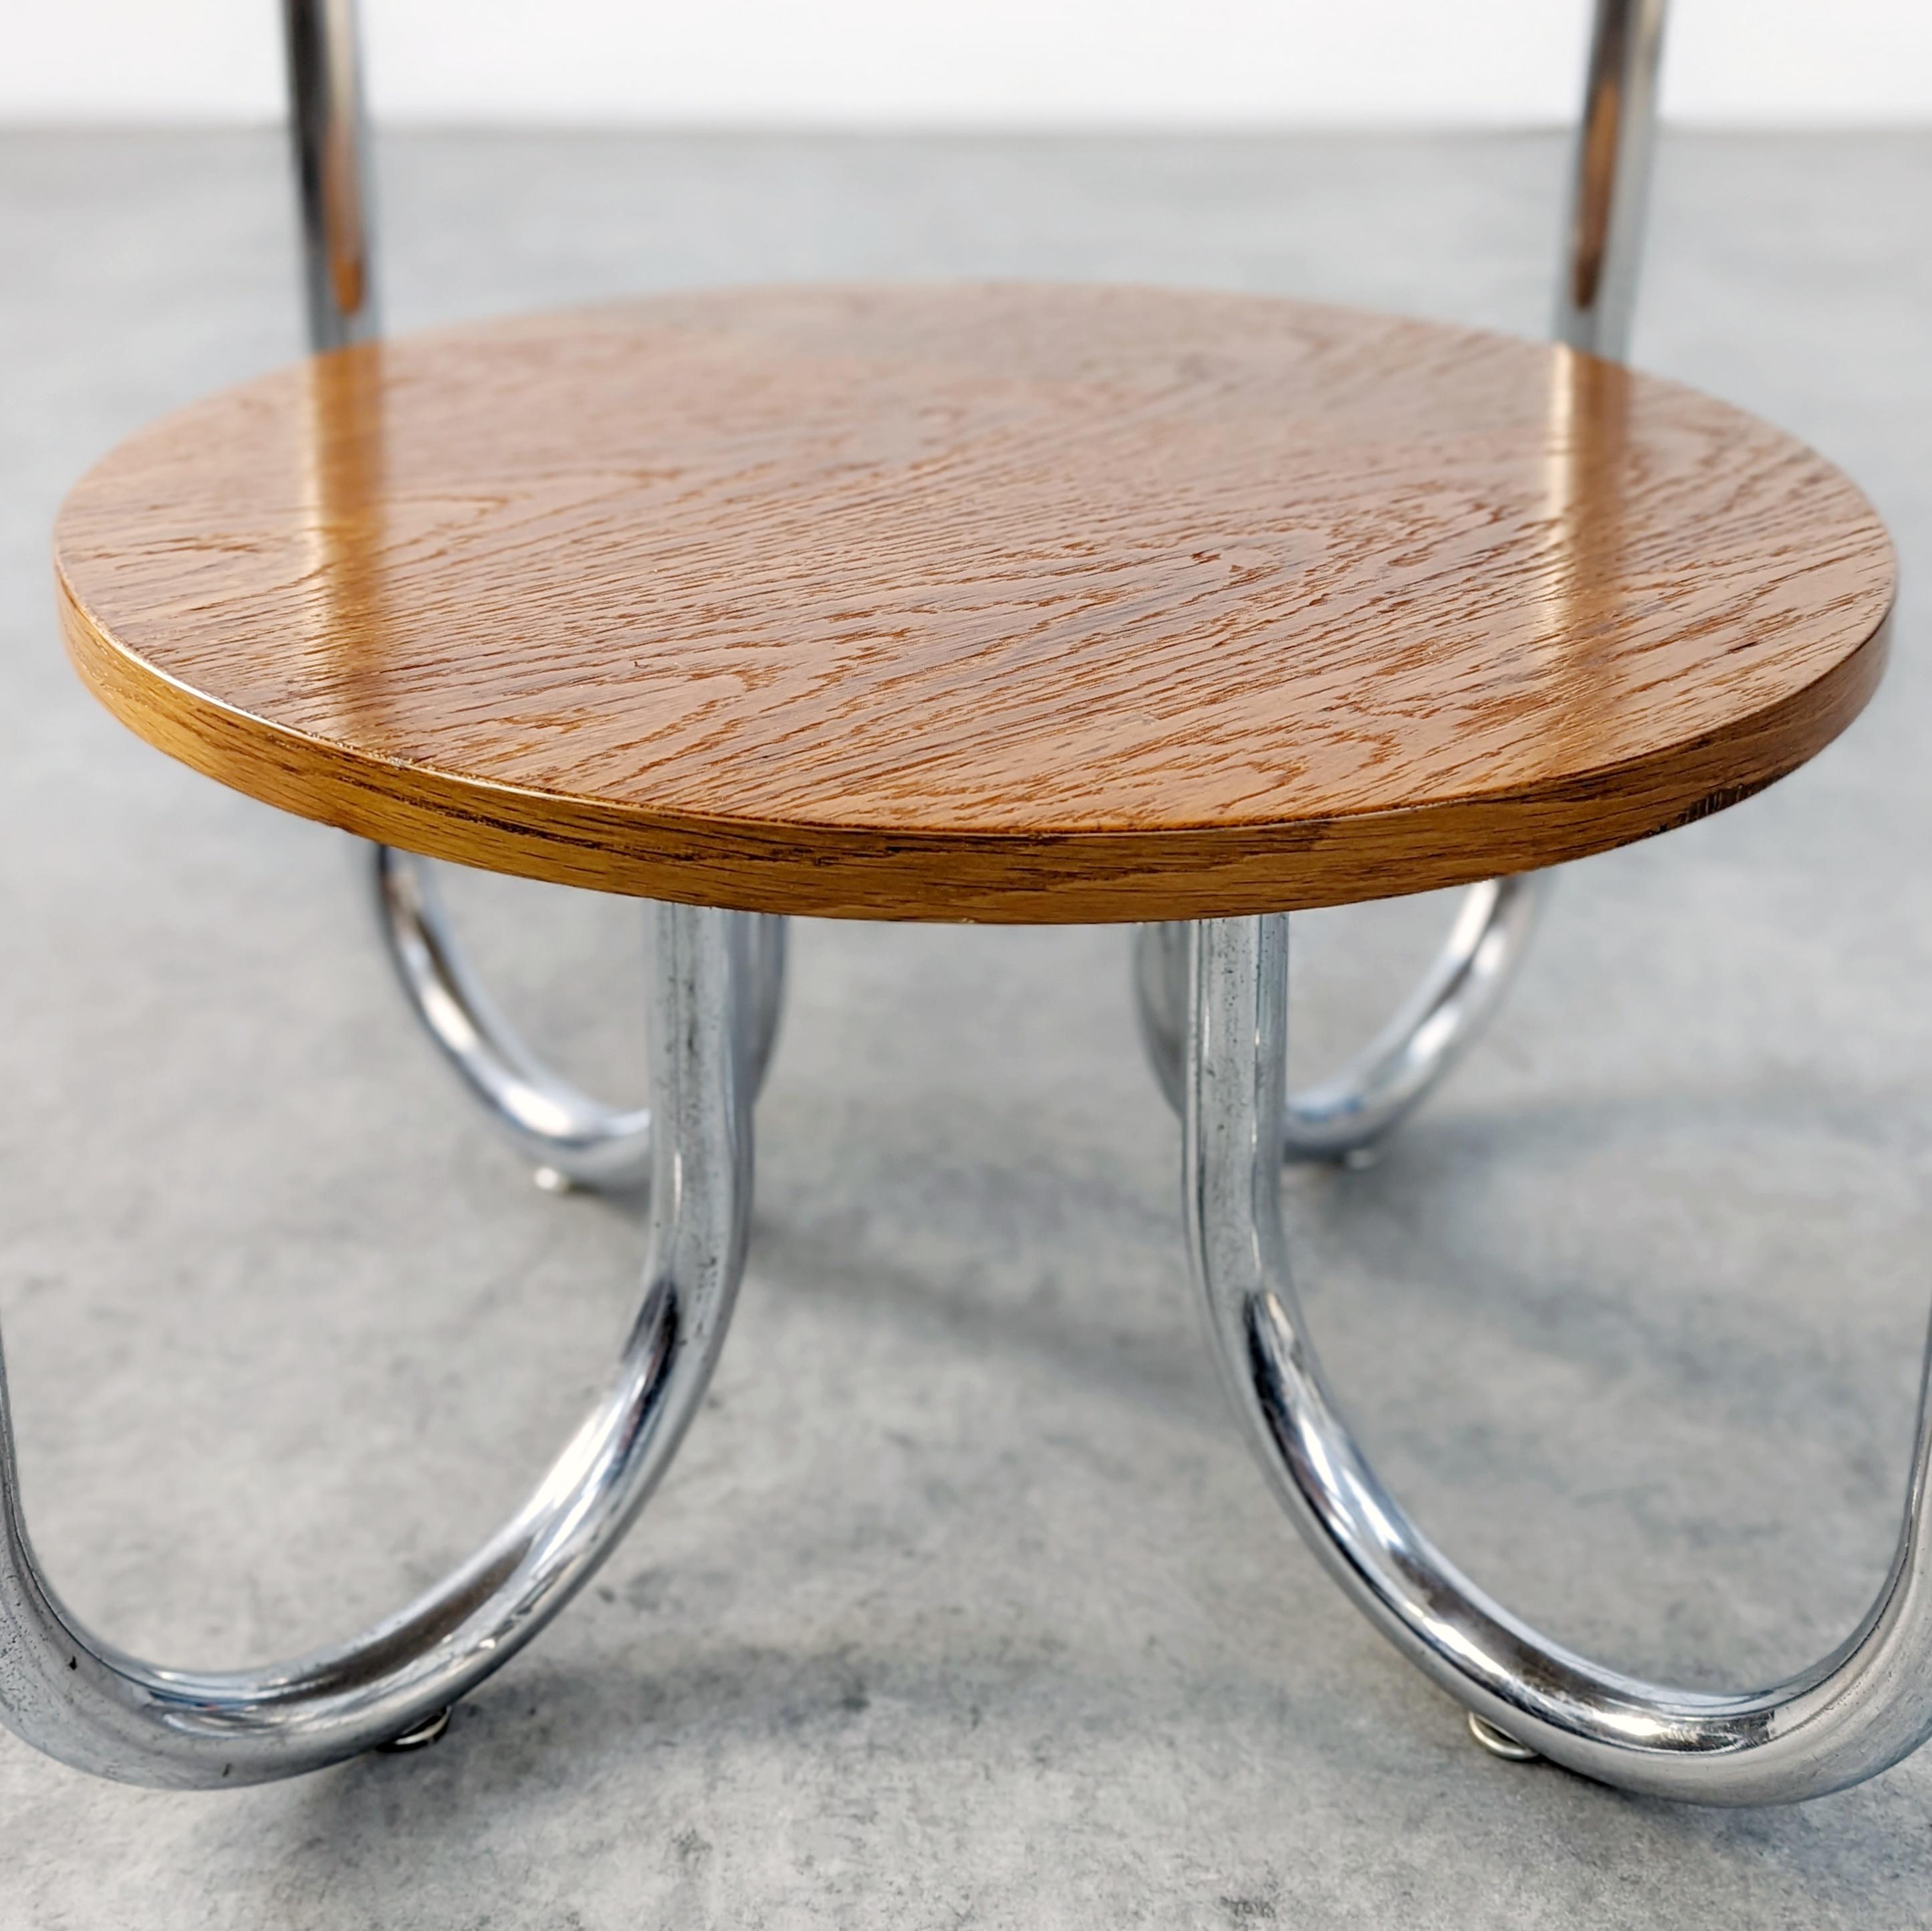 Mid-20th Century Bauhaus Tubular Steel Table by Karel Ort for Gottwald For Sale